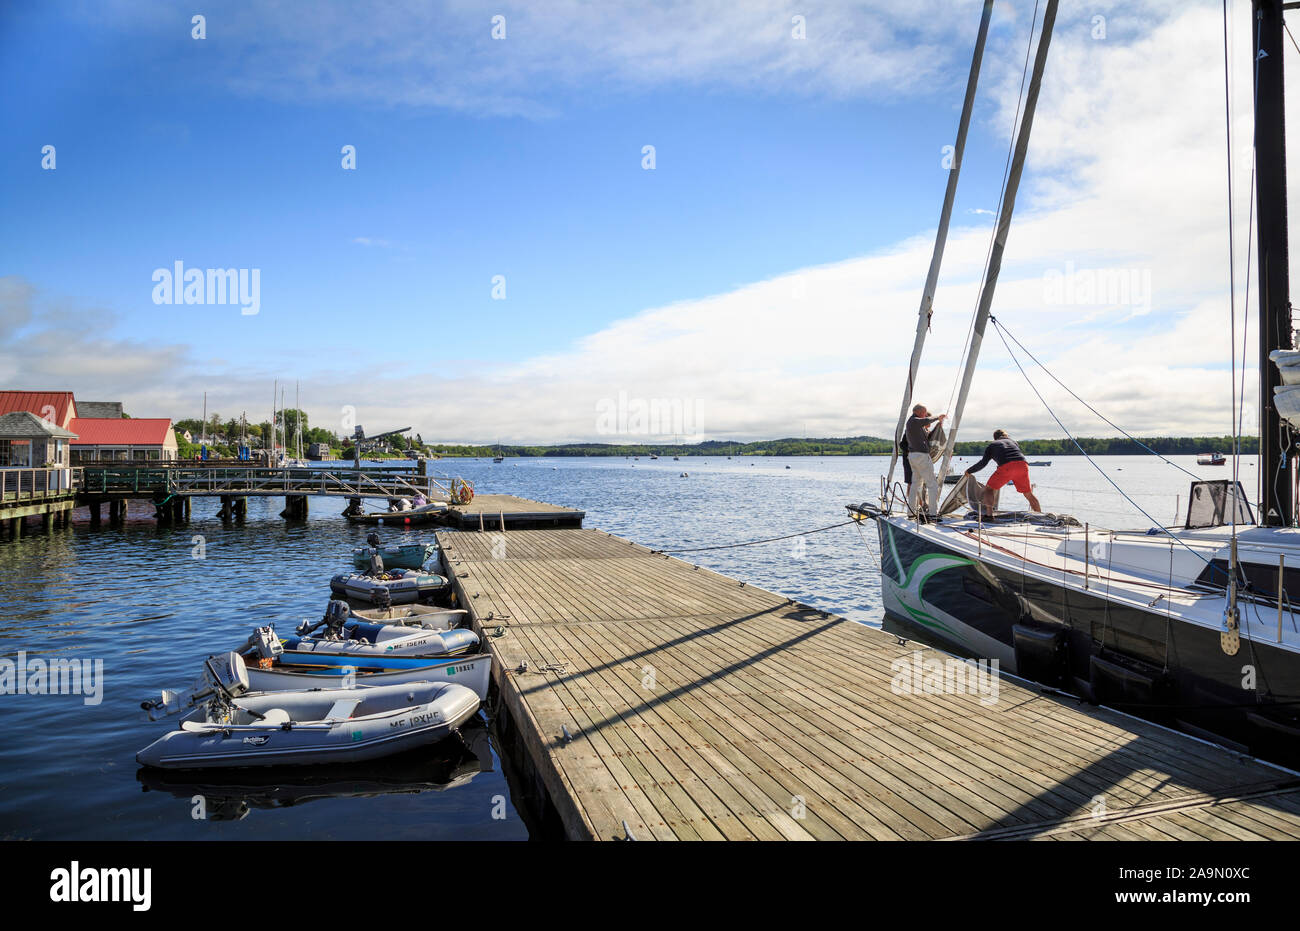 Men rigging sail in Harbor with boats and dock in summer, Castine,  Maine, New England, USA Stock Photo